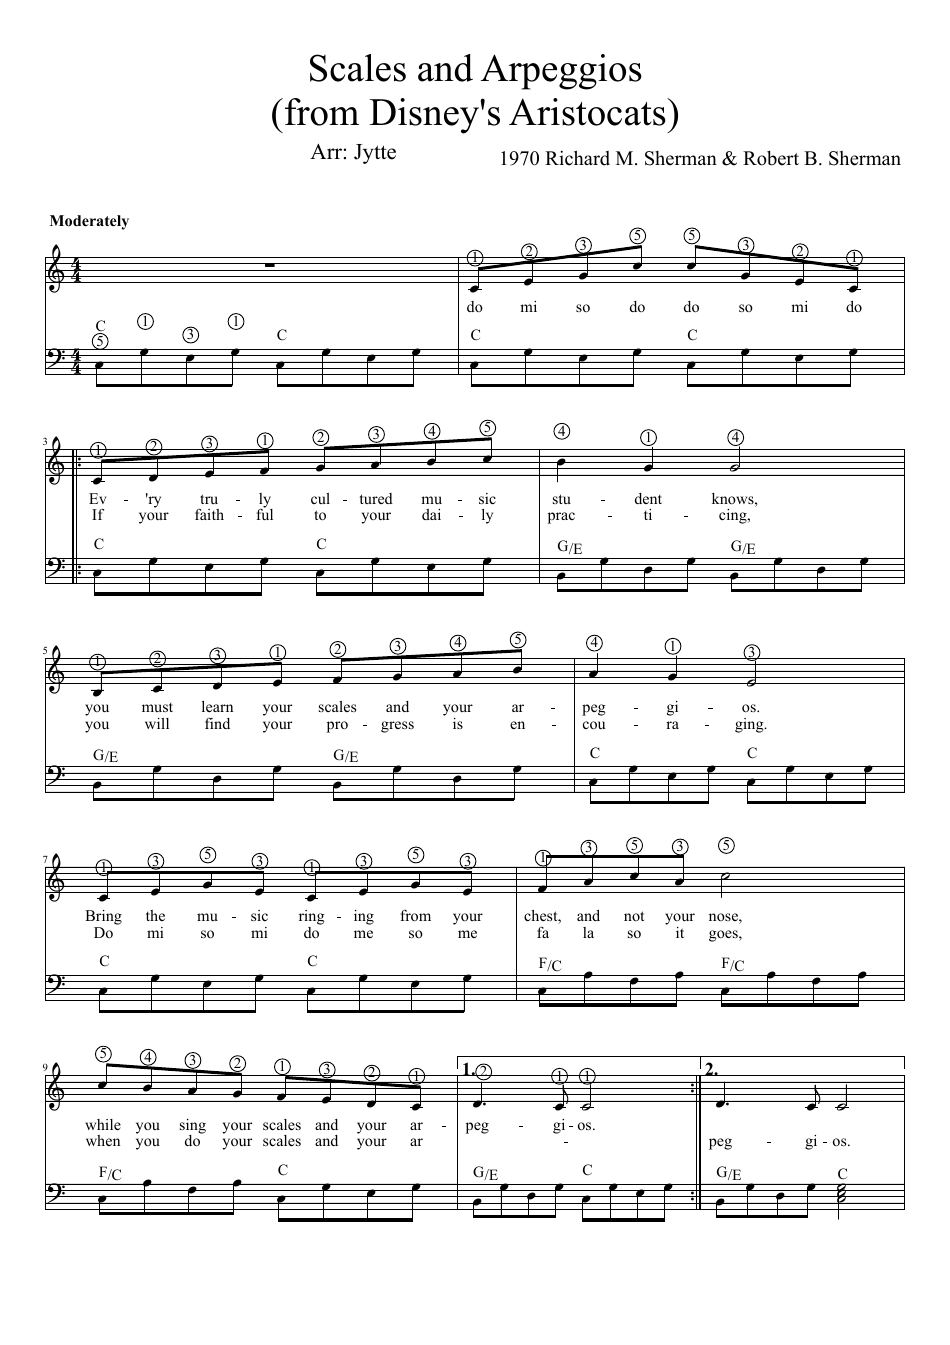 Scales and Arpeggios sheet music with image preview